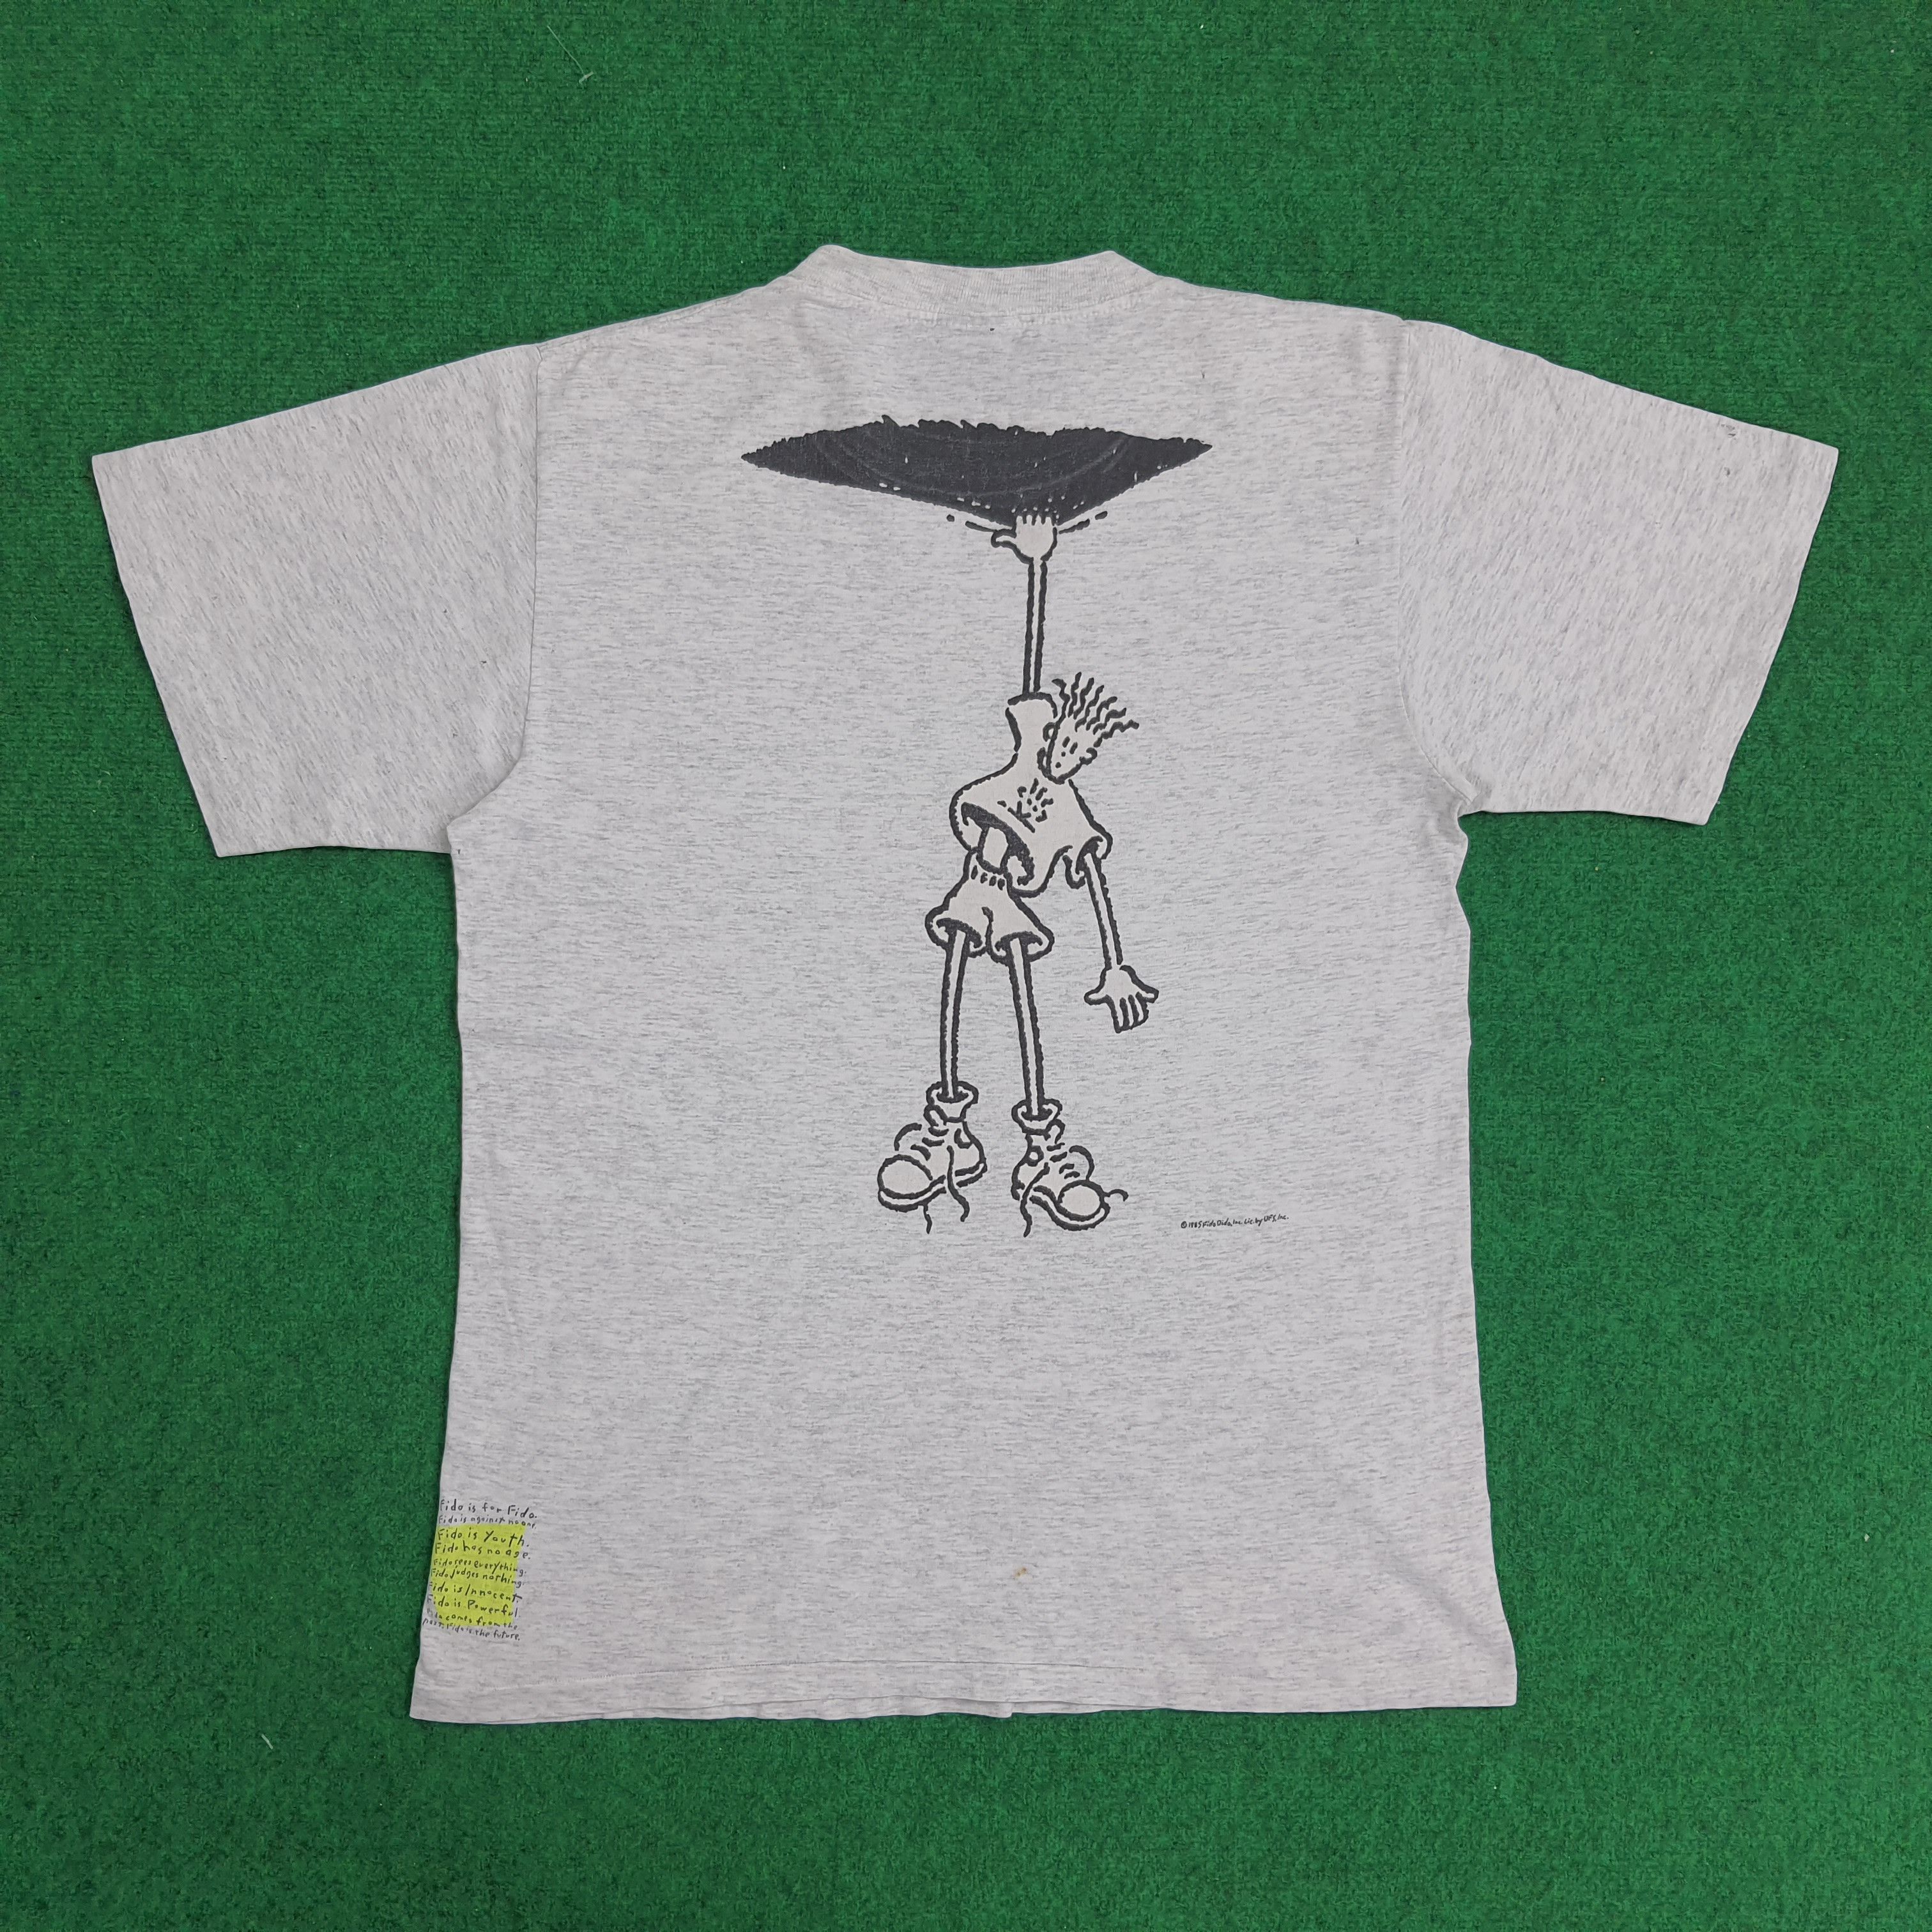 Changes 90's Fido Dido 7UP Tshirt Size US M / EU 48-50 / 2 - 1 Preview